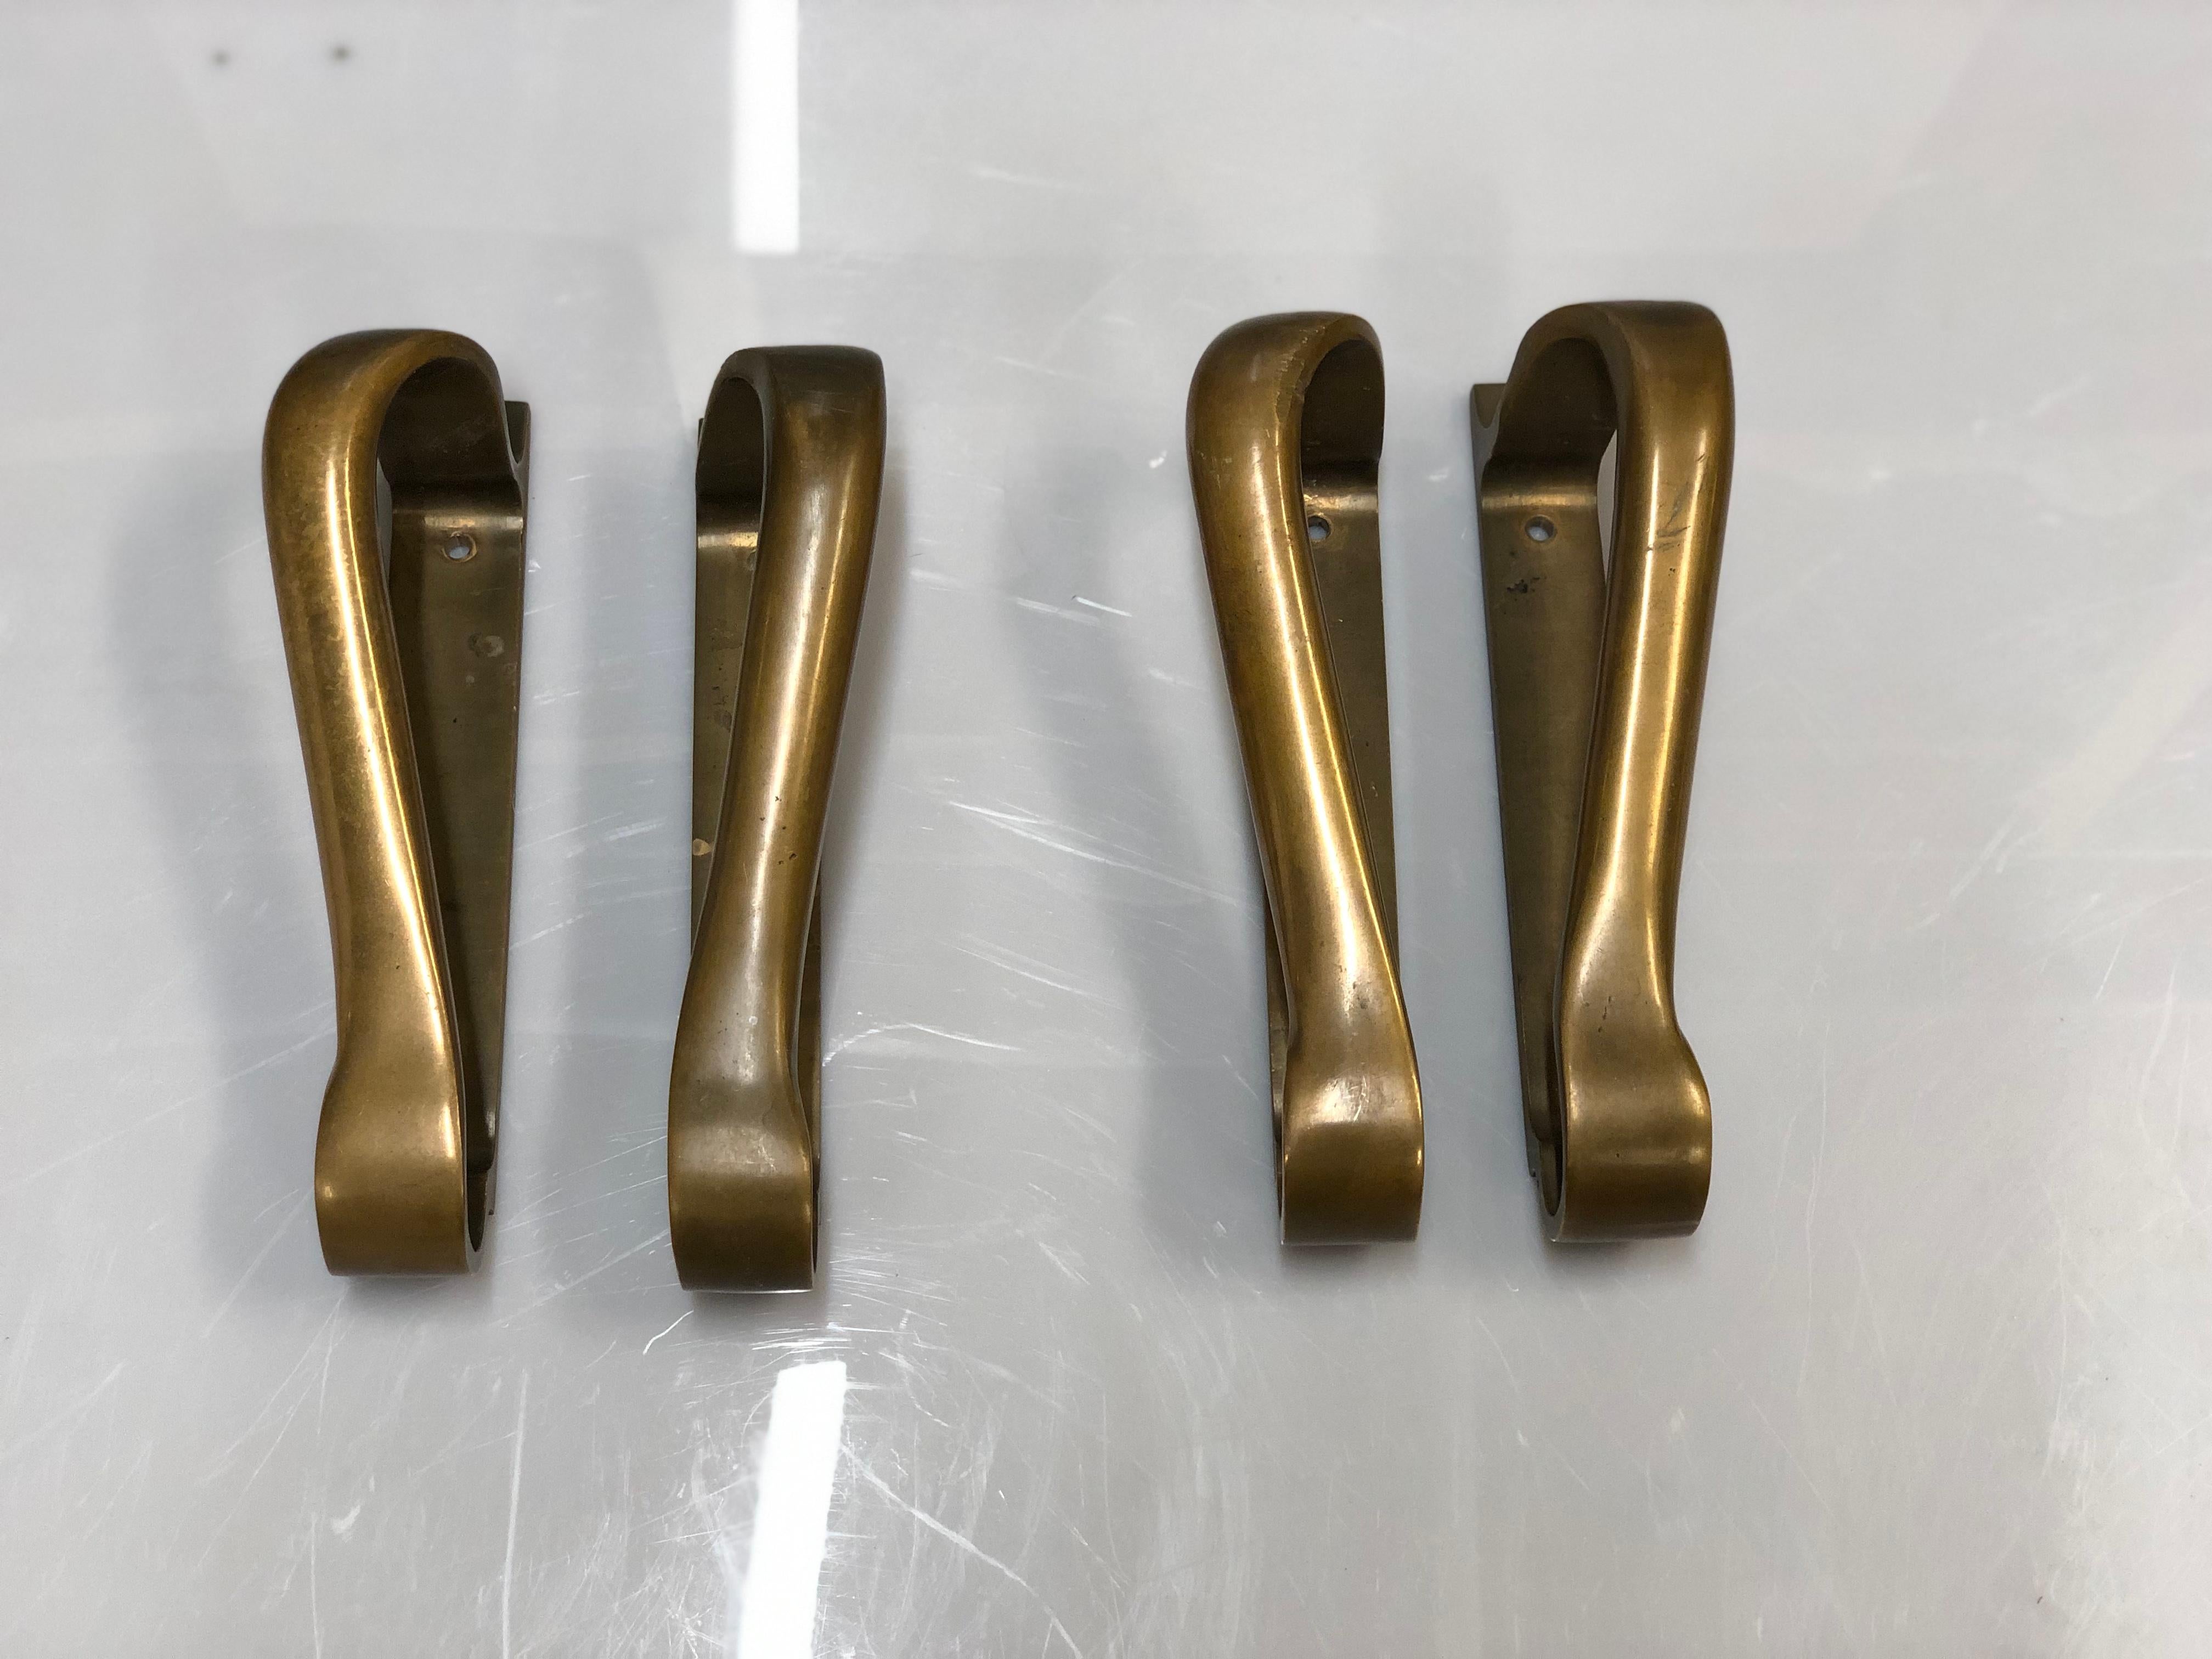 Two very distinct and elegant mid-century door handles in full bronze. Manufactured by valaistustyö and designed by Alvar Aalto himself. Very practical yet stand out pieces with guaranteed quality, craftsmanship, authenticity and design. Pieces like